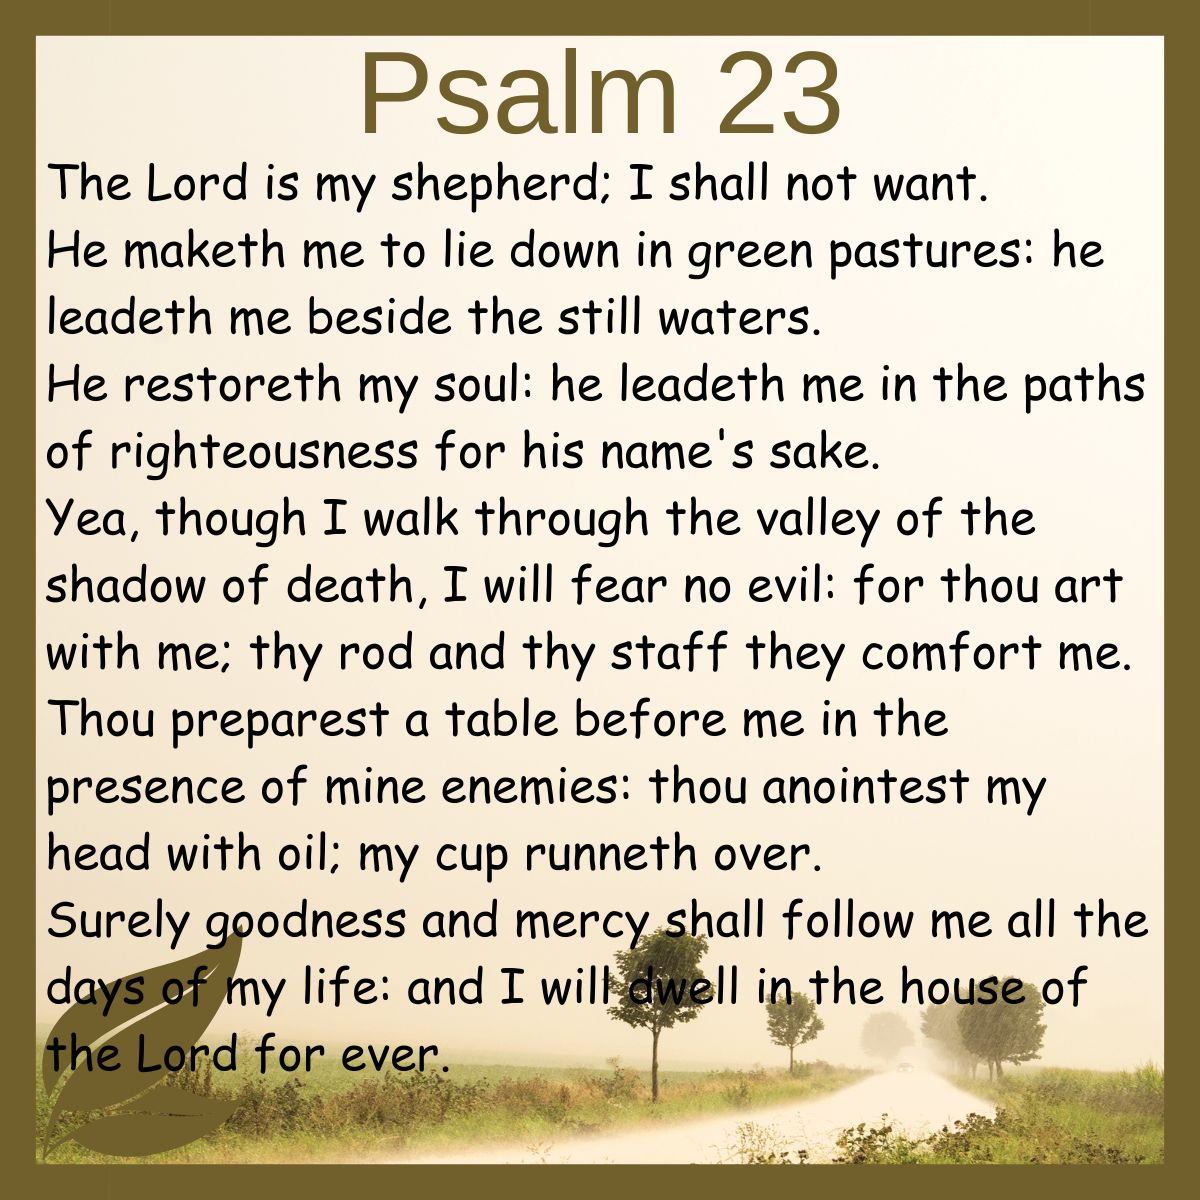 The words of Psalm 23